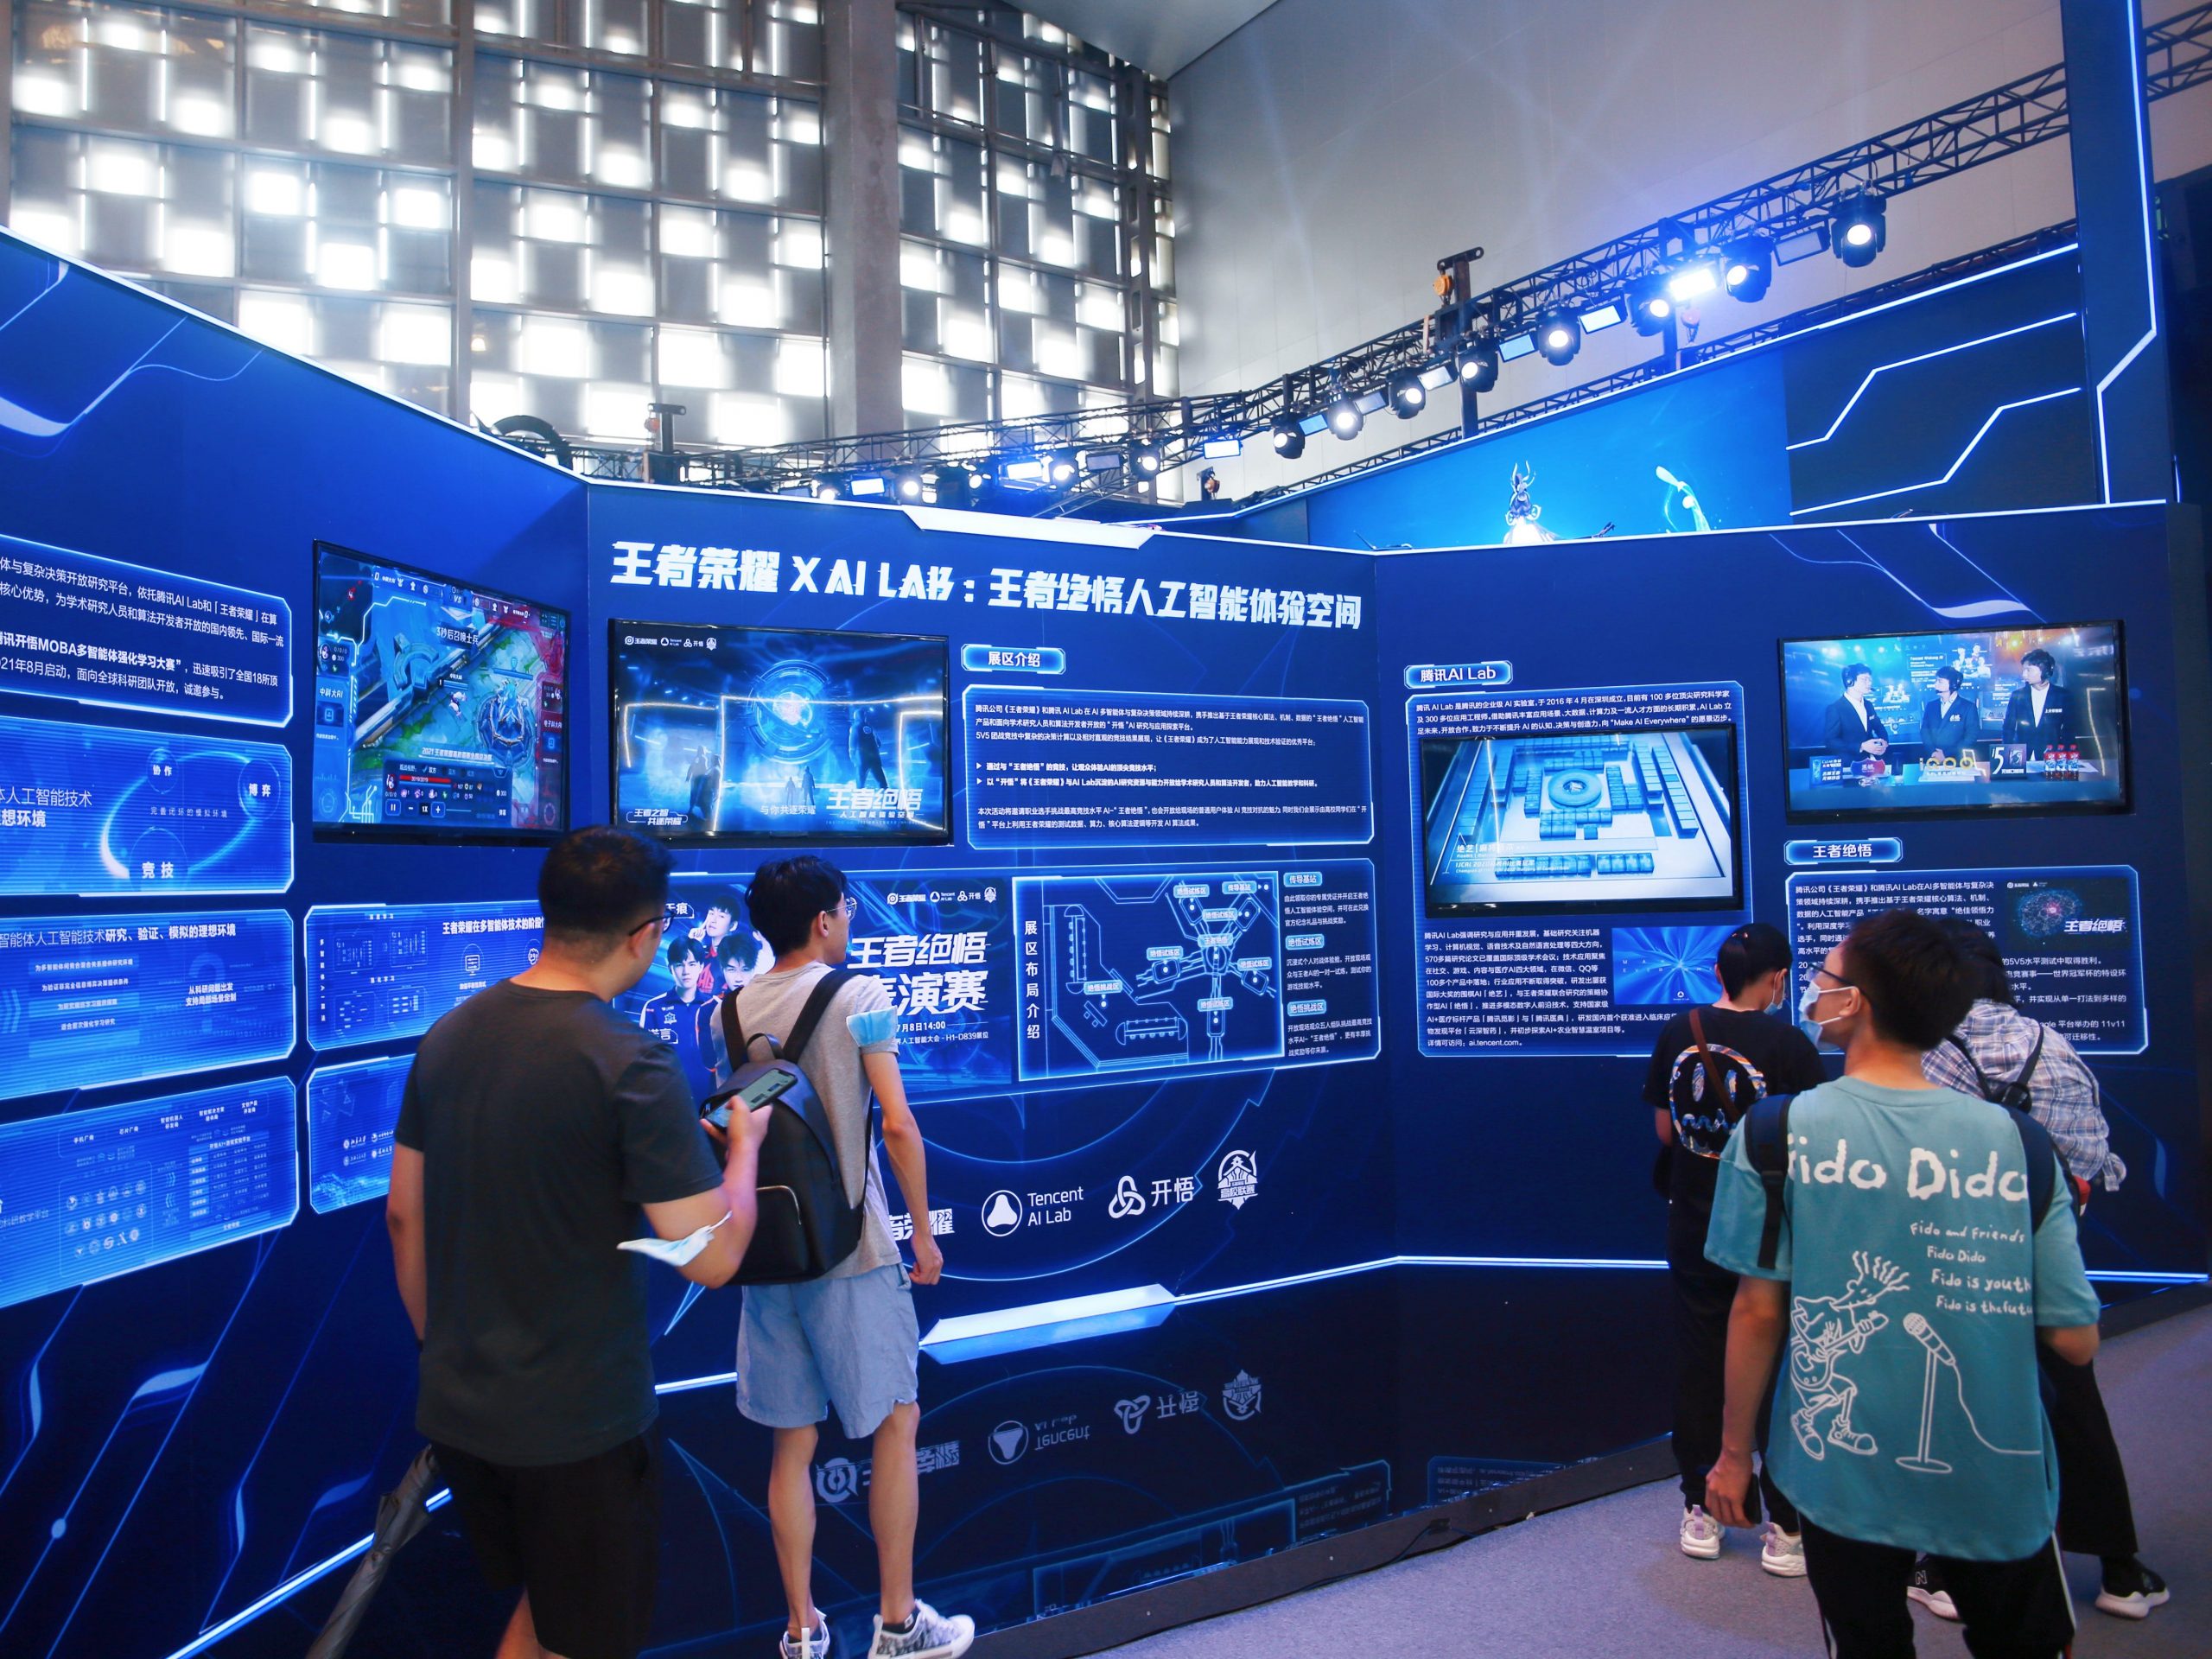 A video game exhibit in China